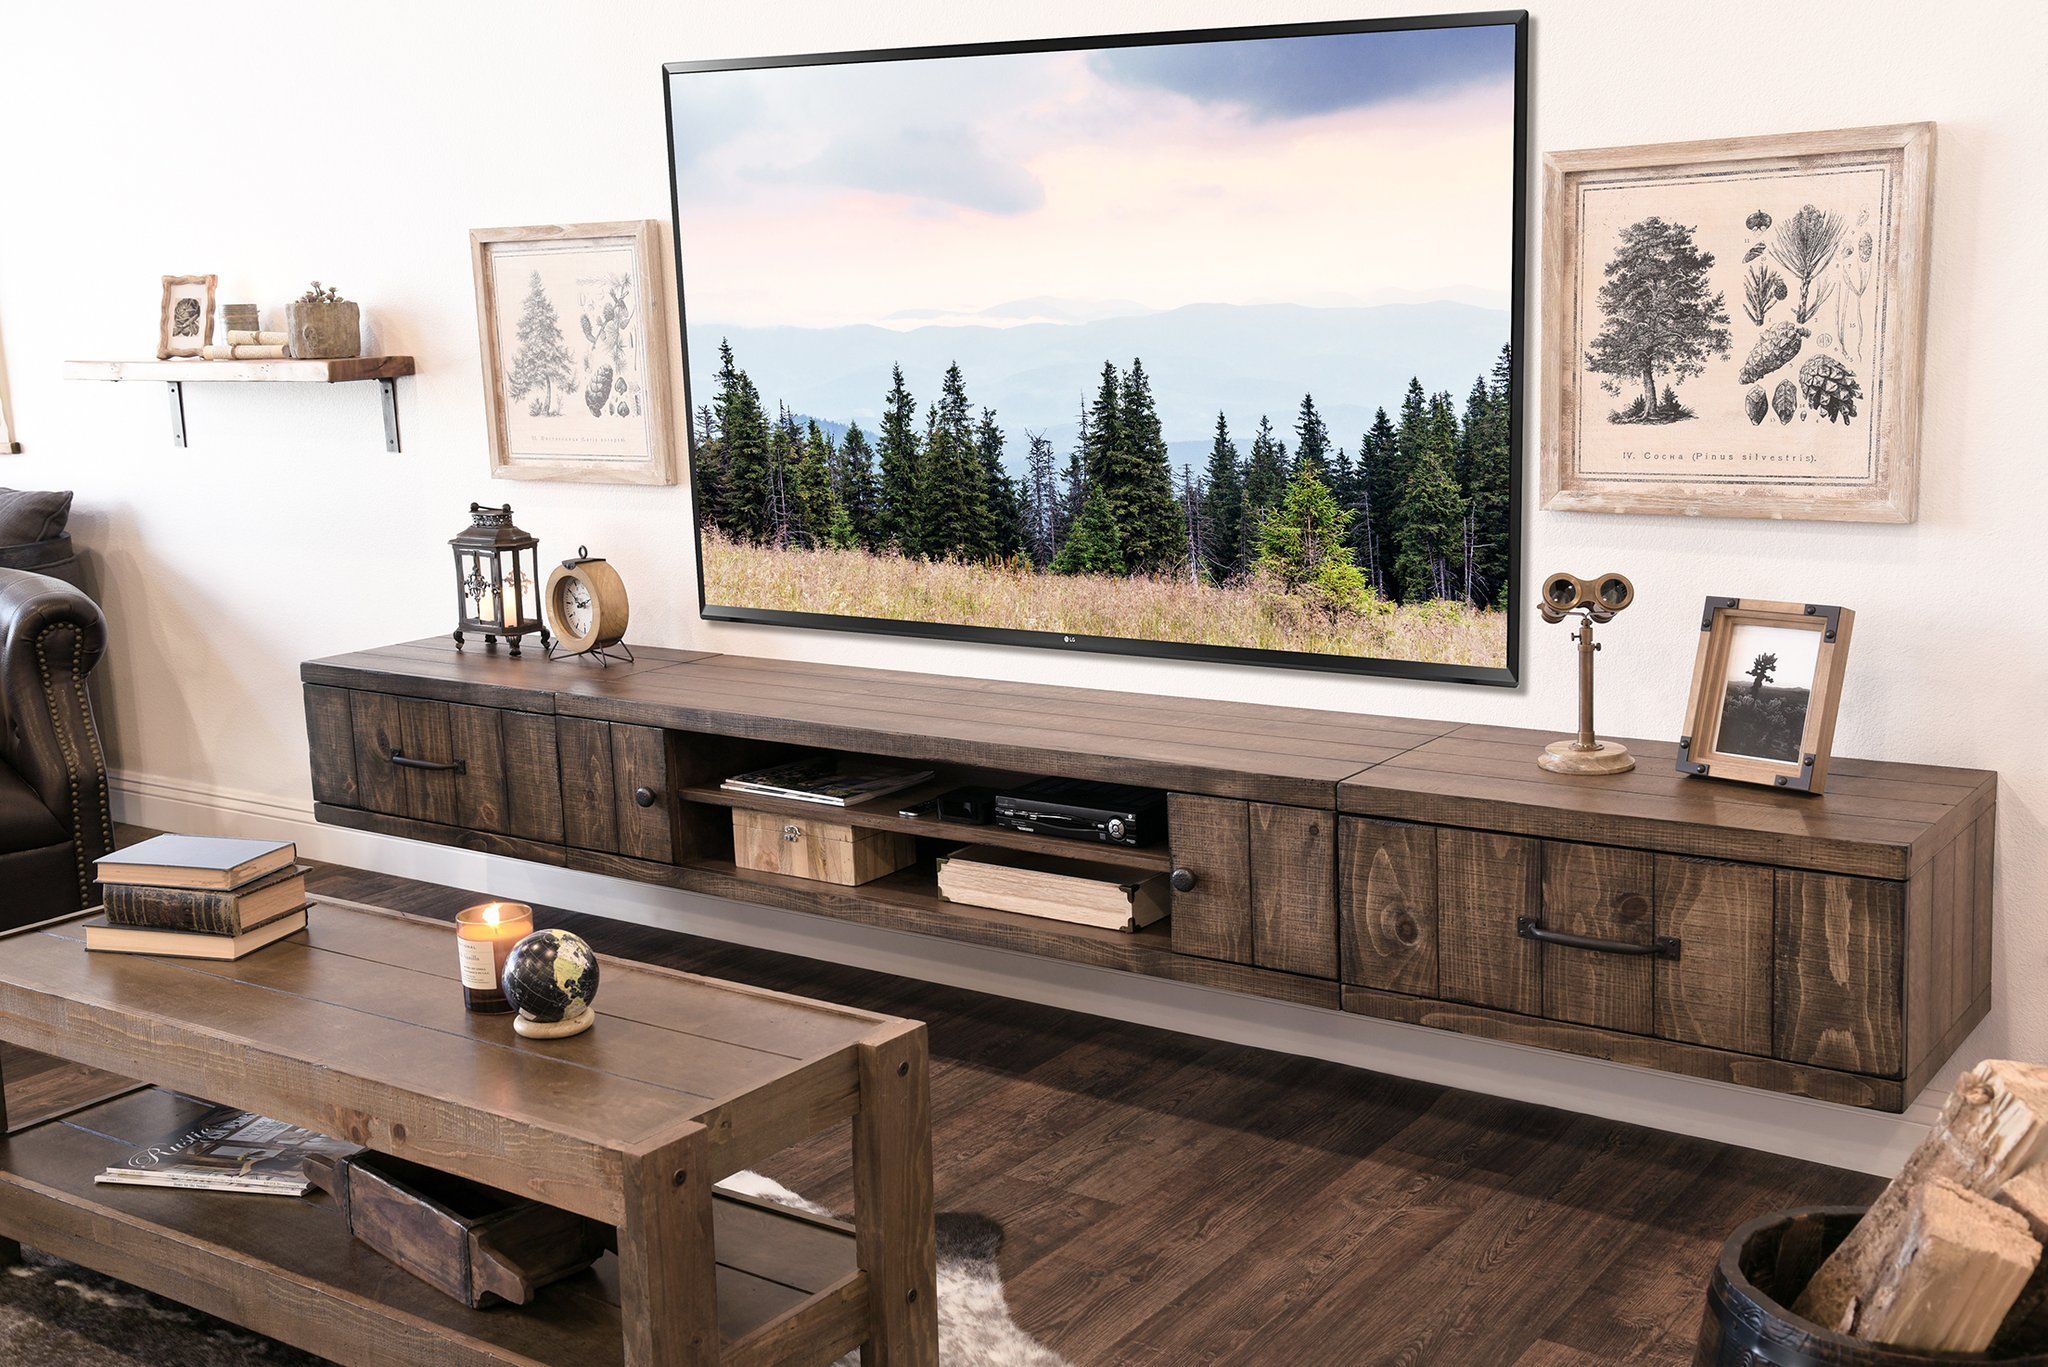 Farmhouse Rustic Wood Floating Tv Stand Entertainment Center – Spice Intended For Modern Farmhouse Rustic Tv Stands (Gallery 7 of 20)